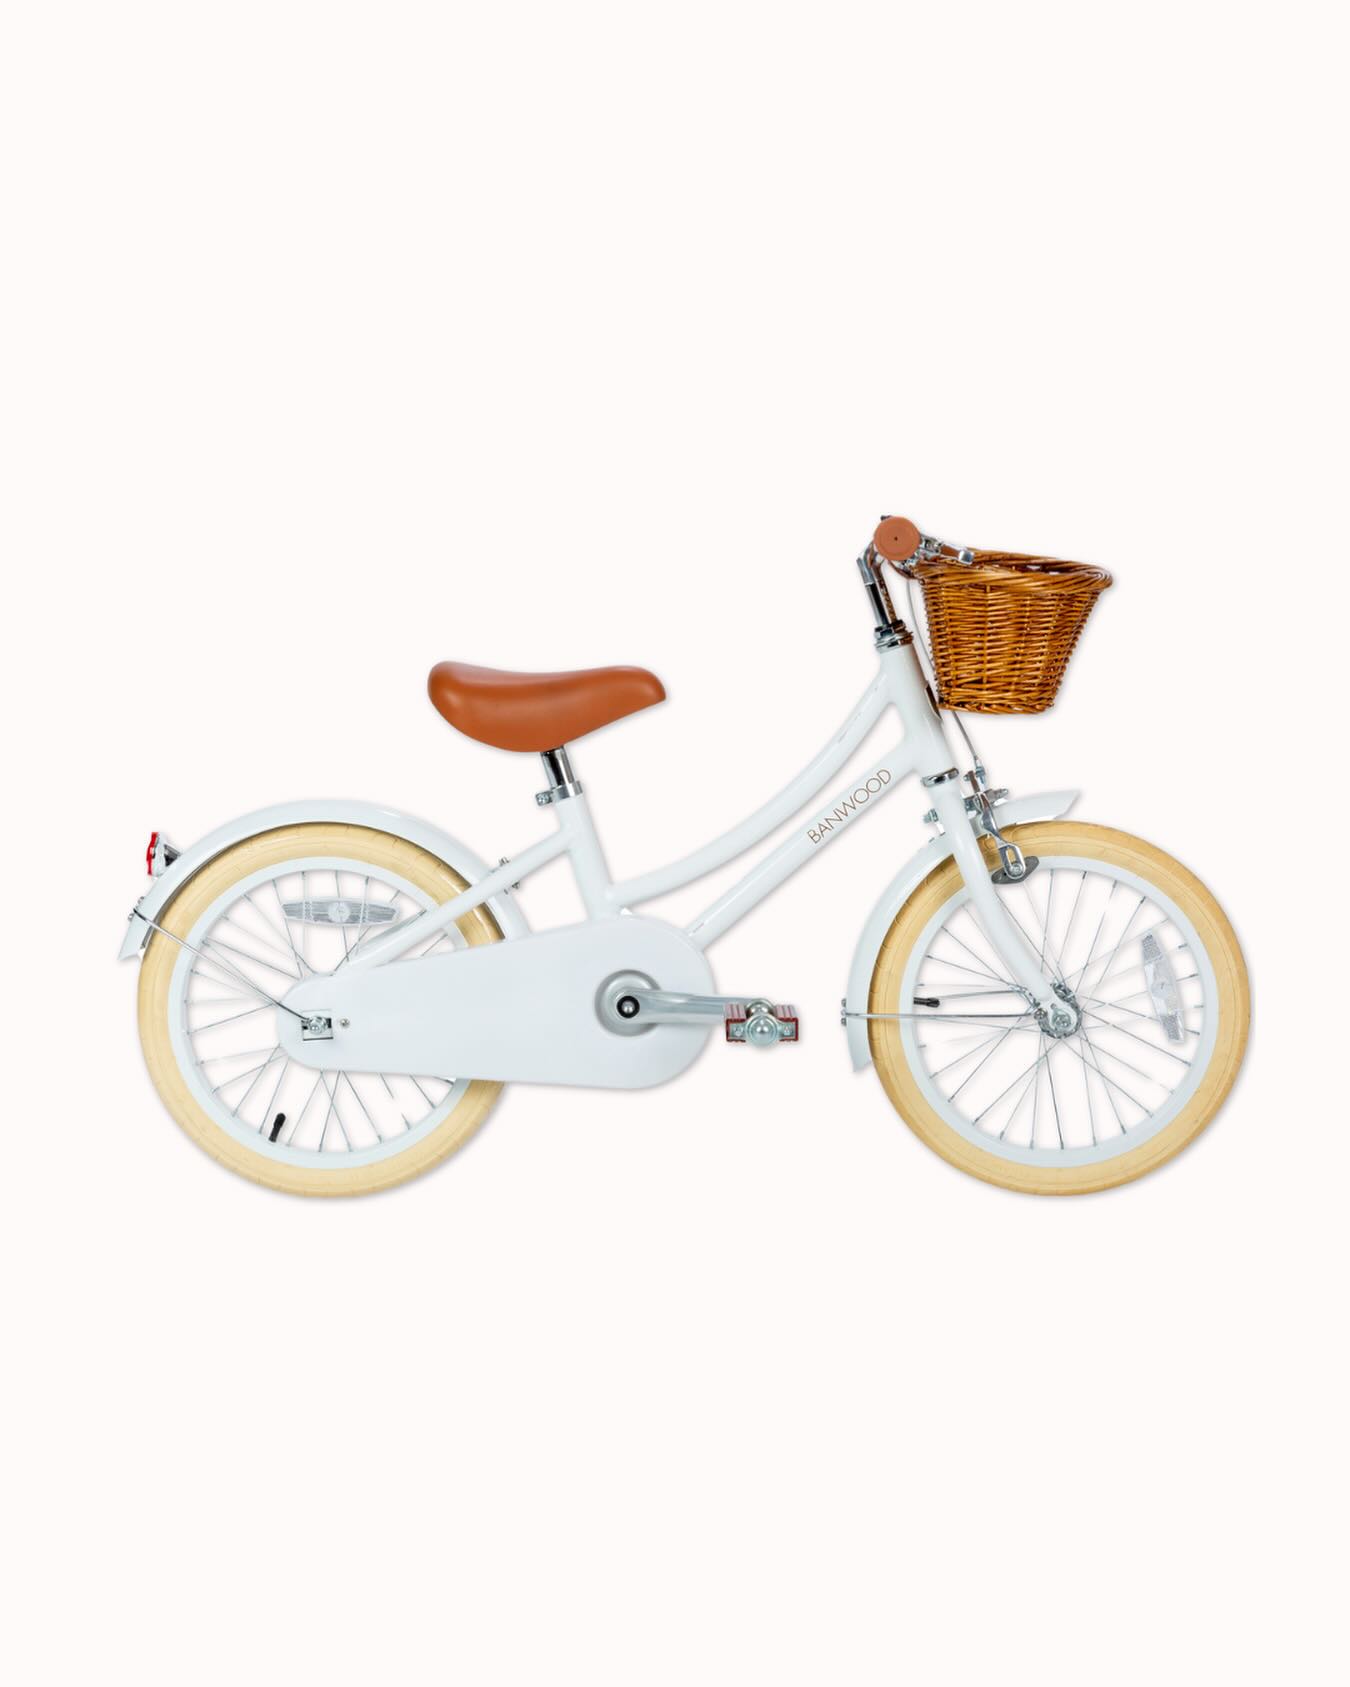 Secure this summer’s adventures with our Classic Bike. Includes training wheels and our iconic wicker basket. Suitable for kids 4+Discover all our Classic Bikes at #Banwood.com